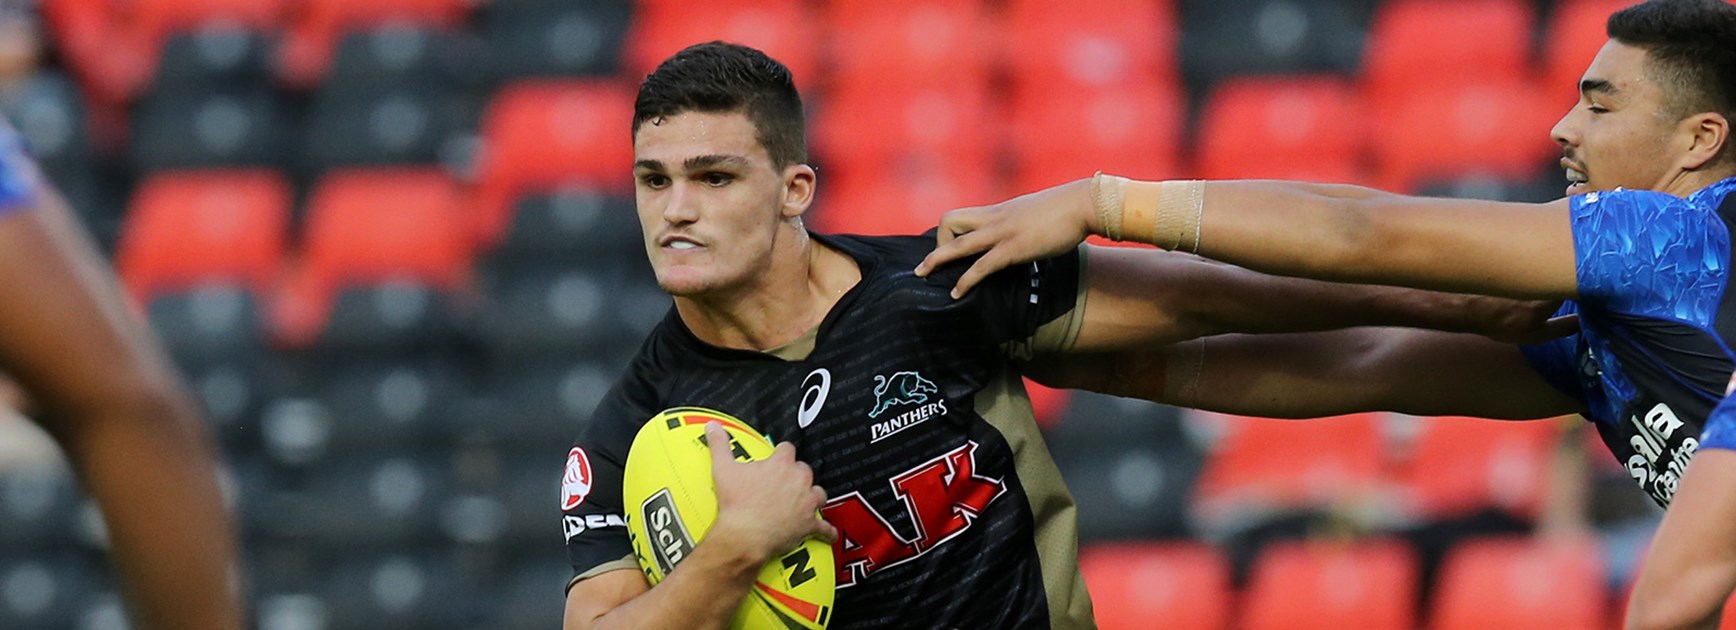 Penrith NYC halfback Nathan Cleary was the star of the show as the Panthers beat the Bulldogs in Round 2.